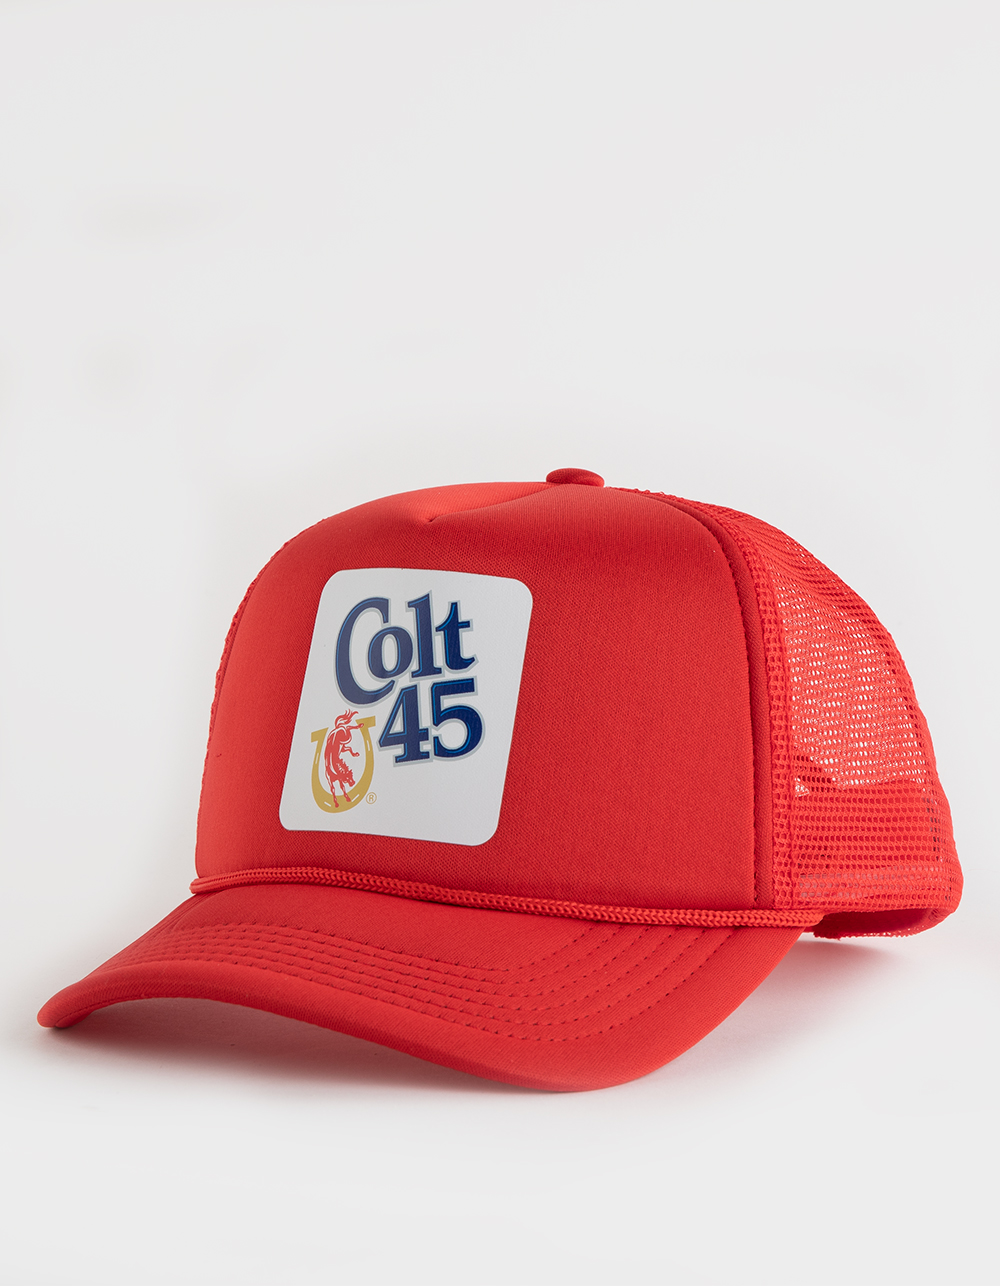 Colt 45 Trucker Hat - Red - One Size